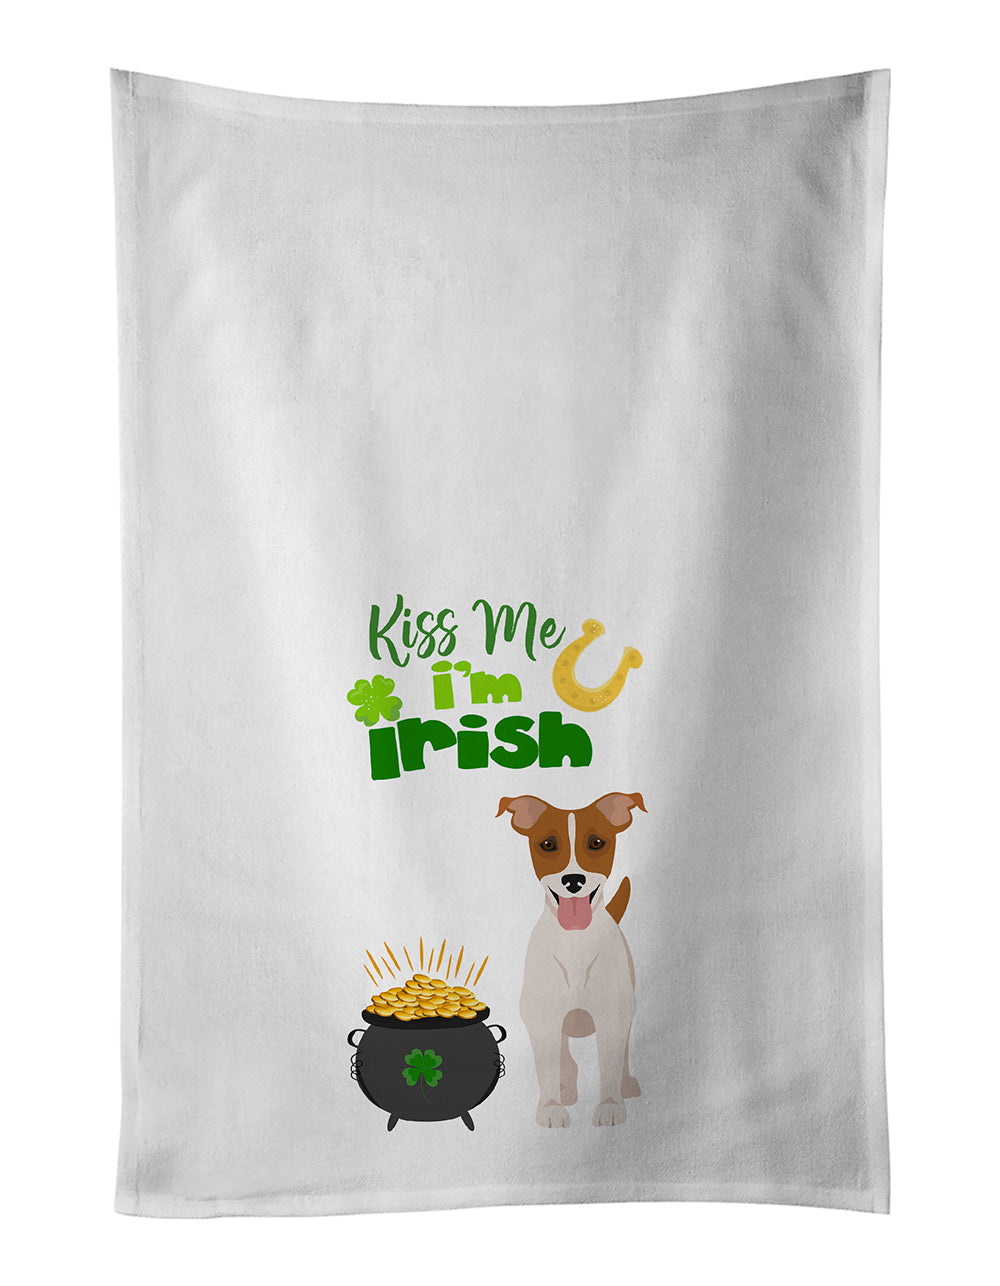 Buy this Brown White Smooth Jack Russell Terrier St. Patrick's Day White Kitchen Towel Set of 2 Dish Towels